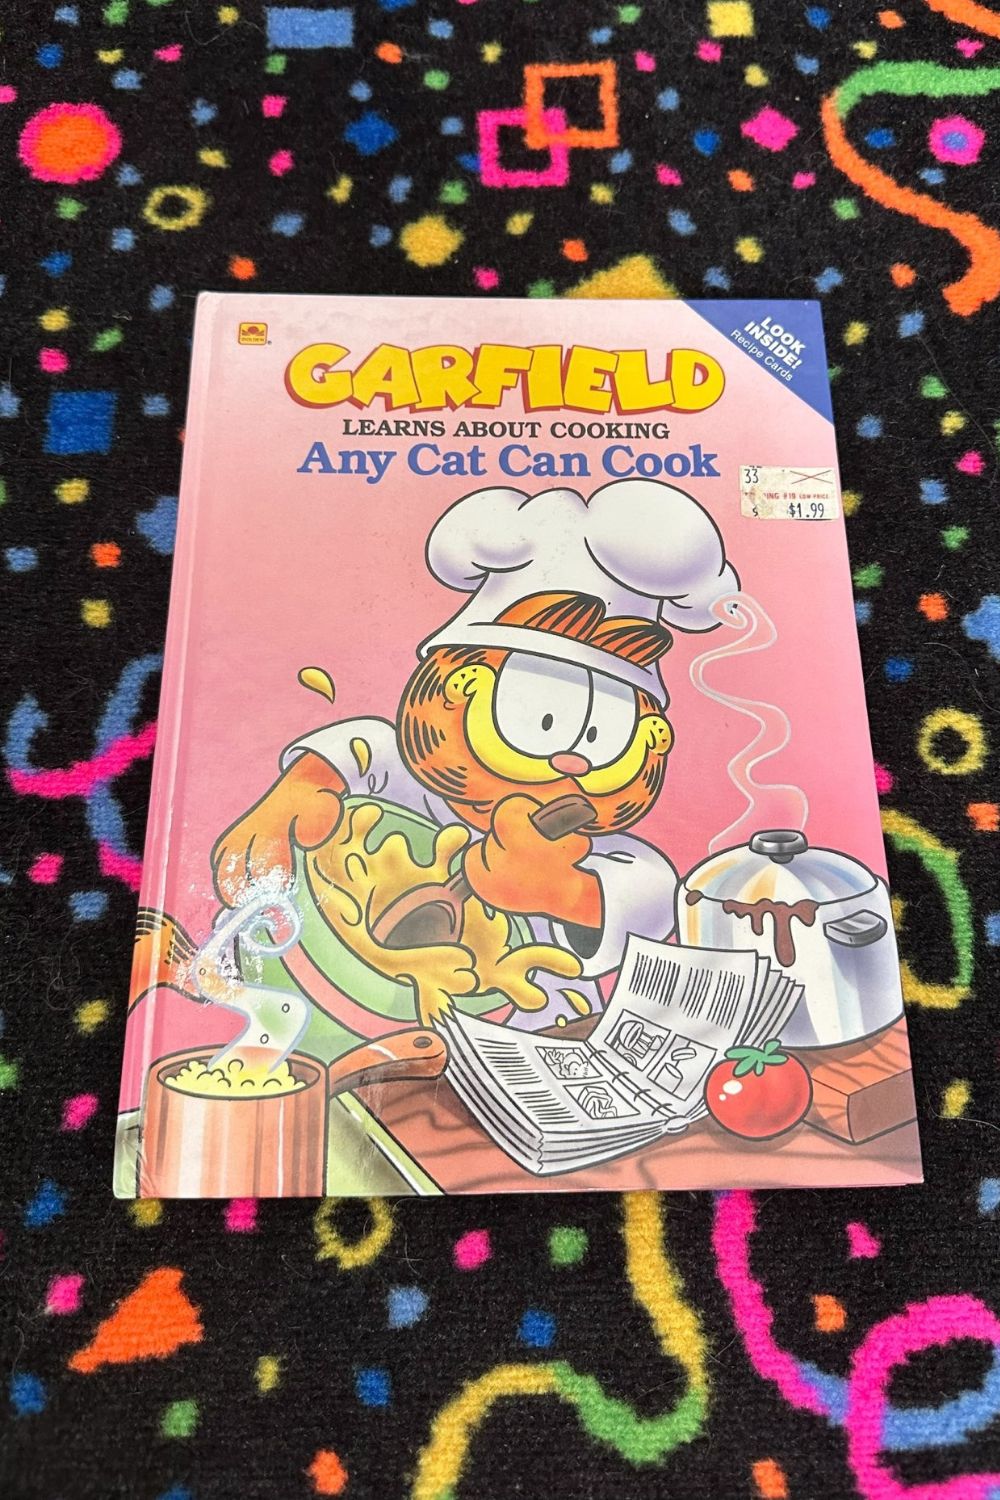 1992 GARFIELD ANY CAT CAN COOK BOOK*